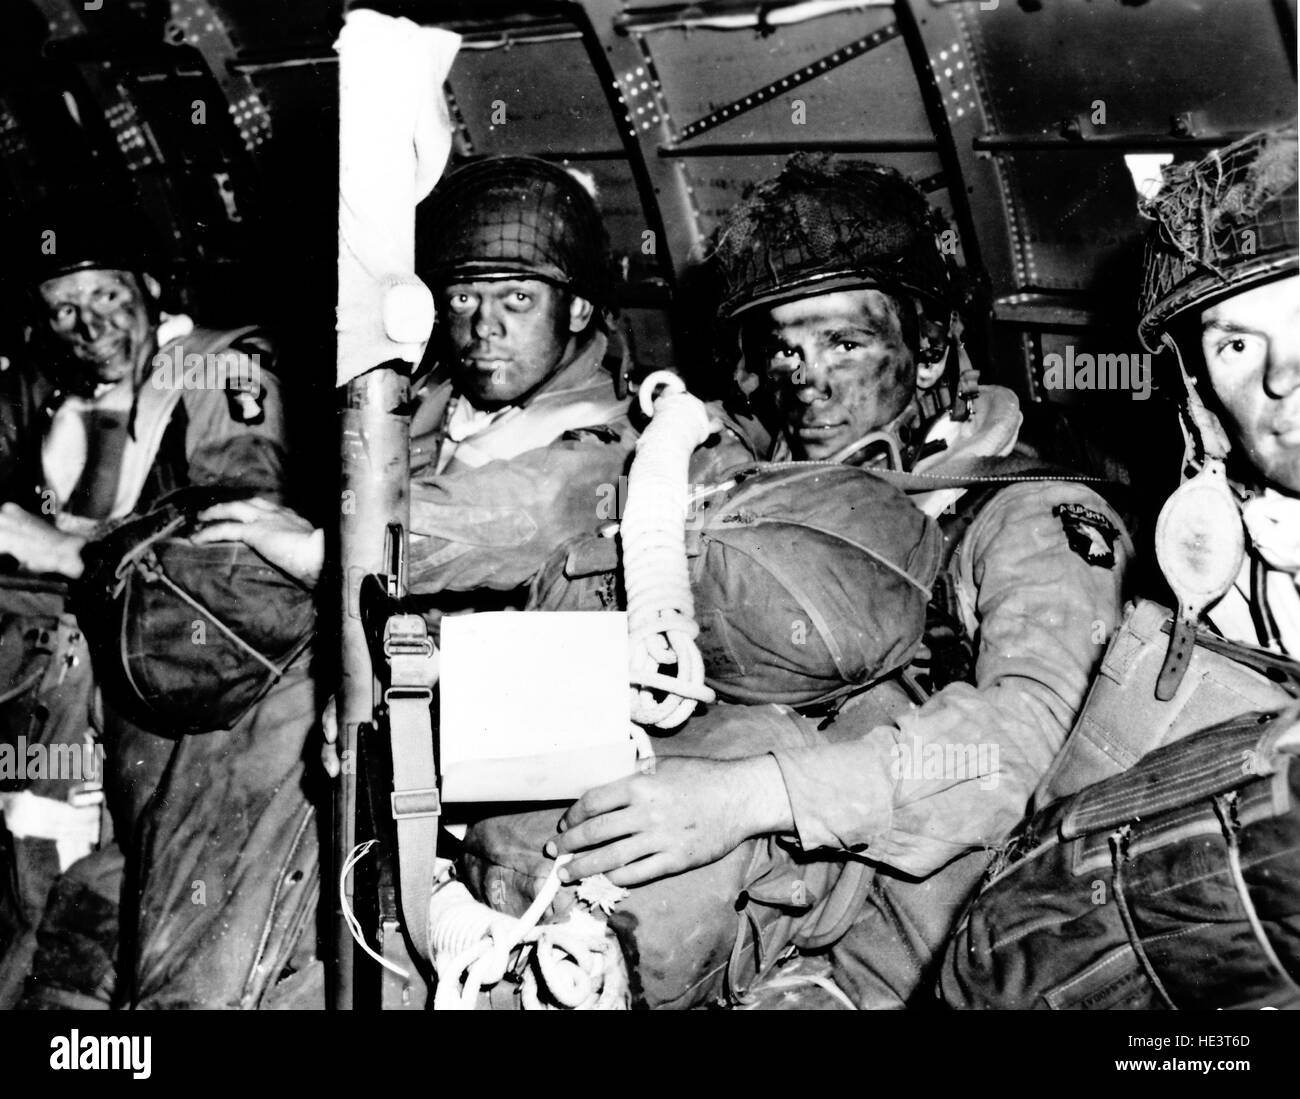 Normandy, France, June 6, 1944. Paratroopers of the 101st Division Airborne 'The screaming' eagles aboard a C-47 before launch Stock Photo